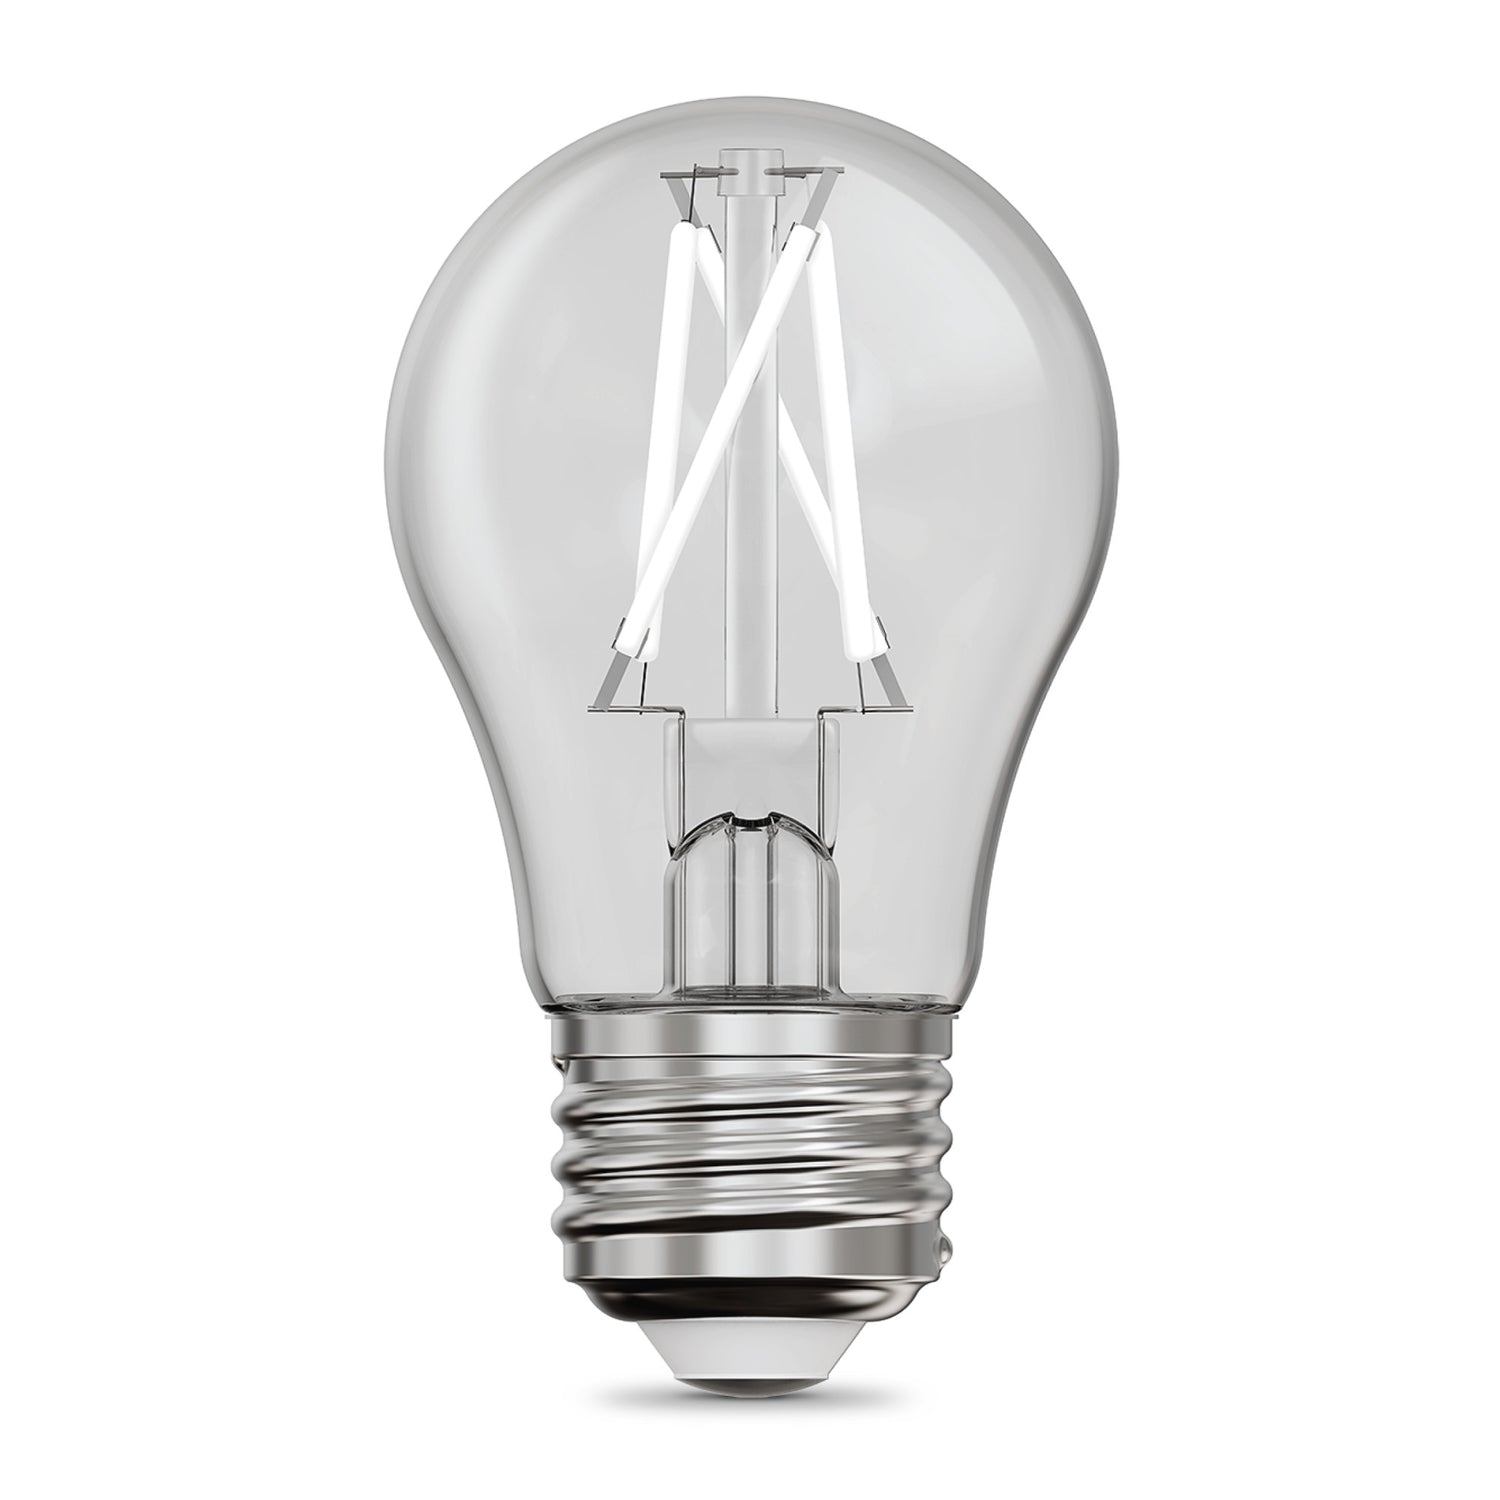 8.3W (60W Replacement) True White (3500K) A15 E26 Base Exposed White Filament LED Light Bulb (2-Pack)